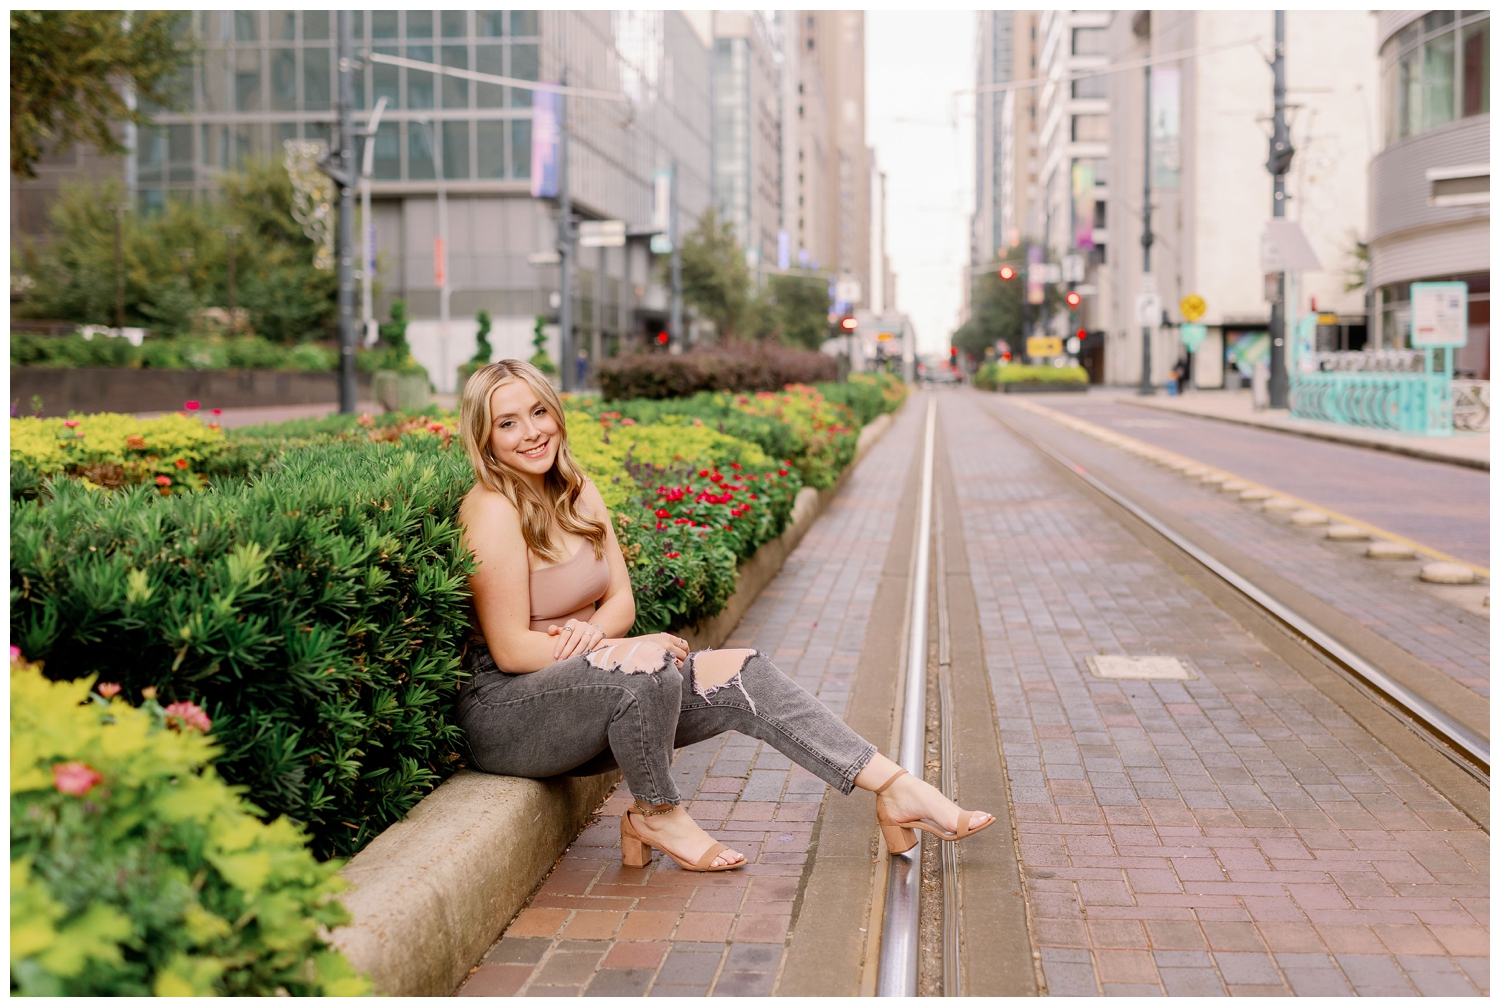 girl sitting on curb downtown in front of buildings senior photos Main Street Houston